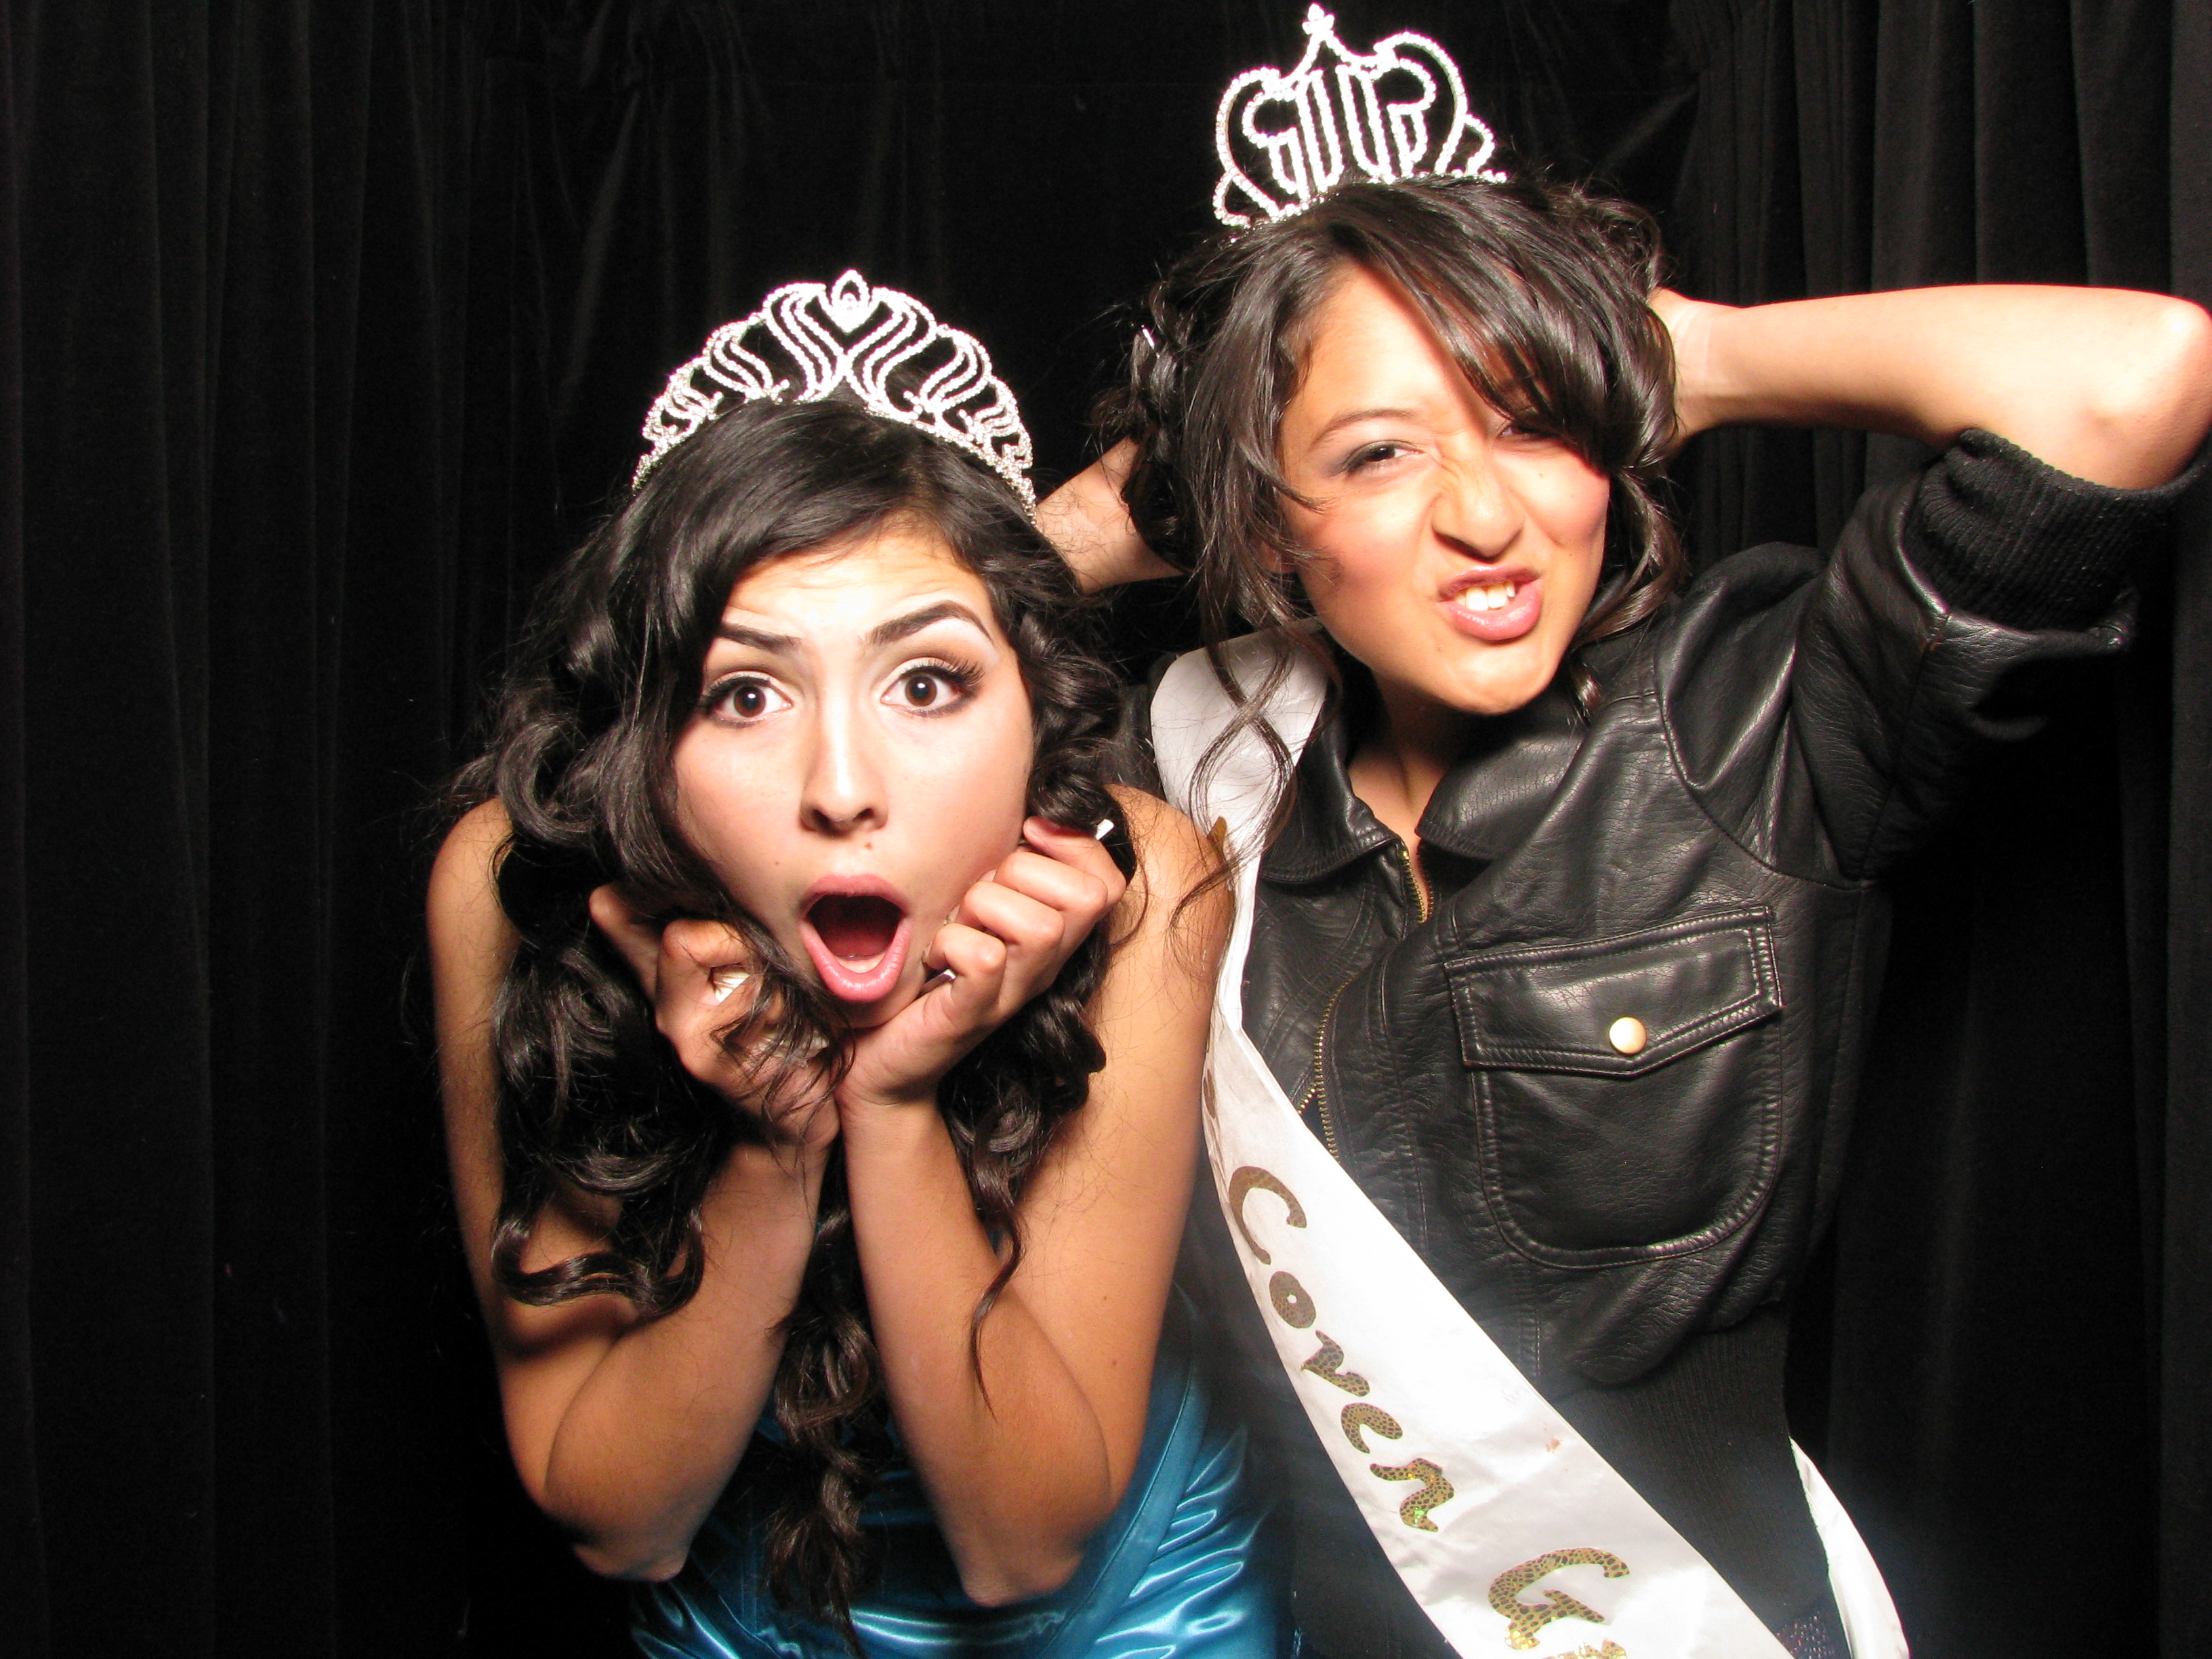 ShutterBooth Charlotte Photo Booth Charlotte (704)469-8420